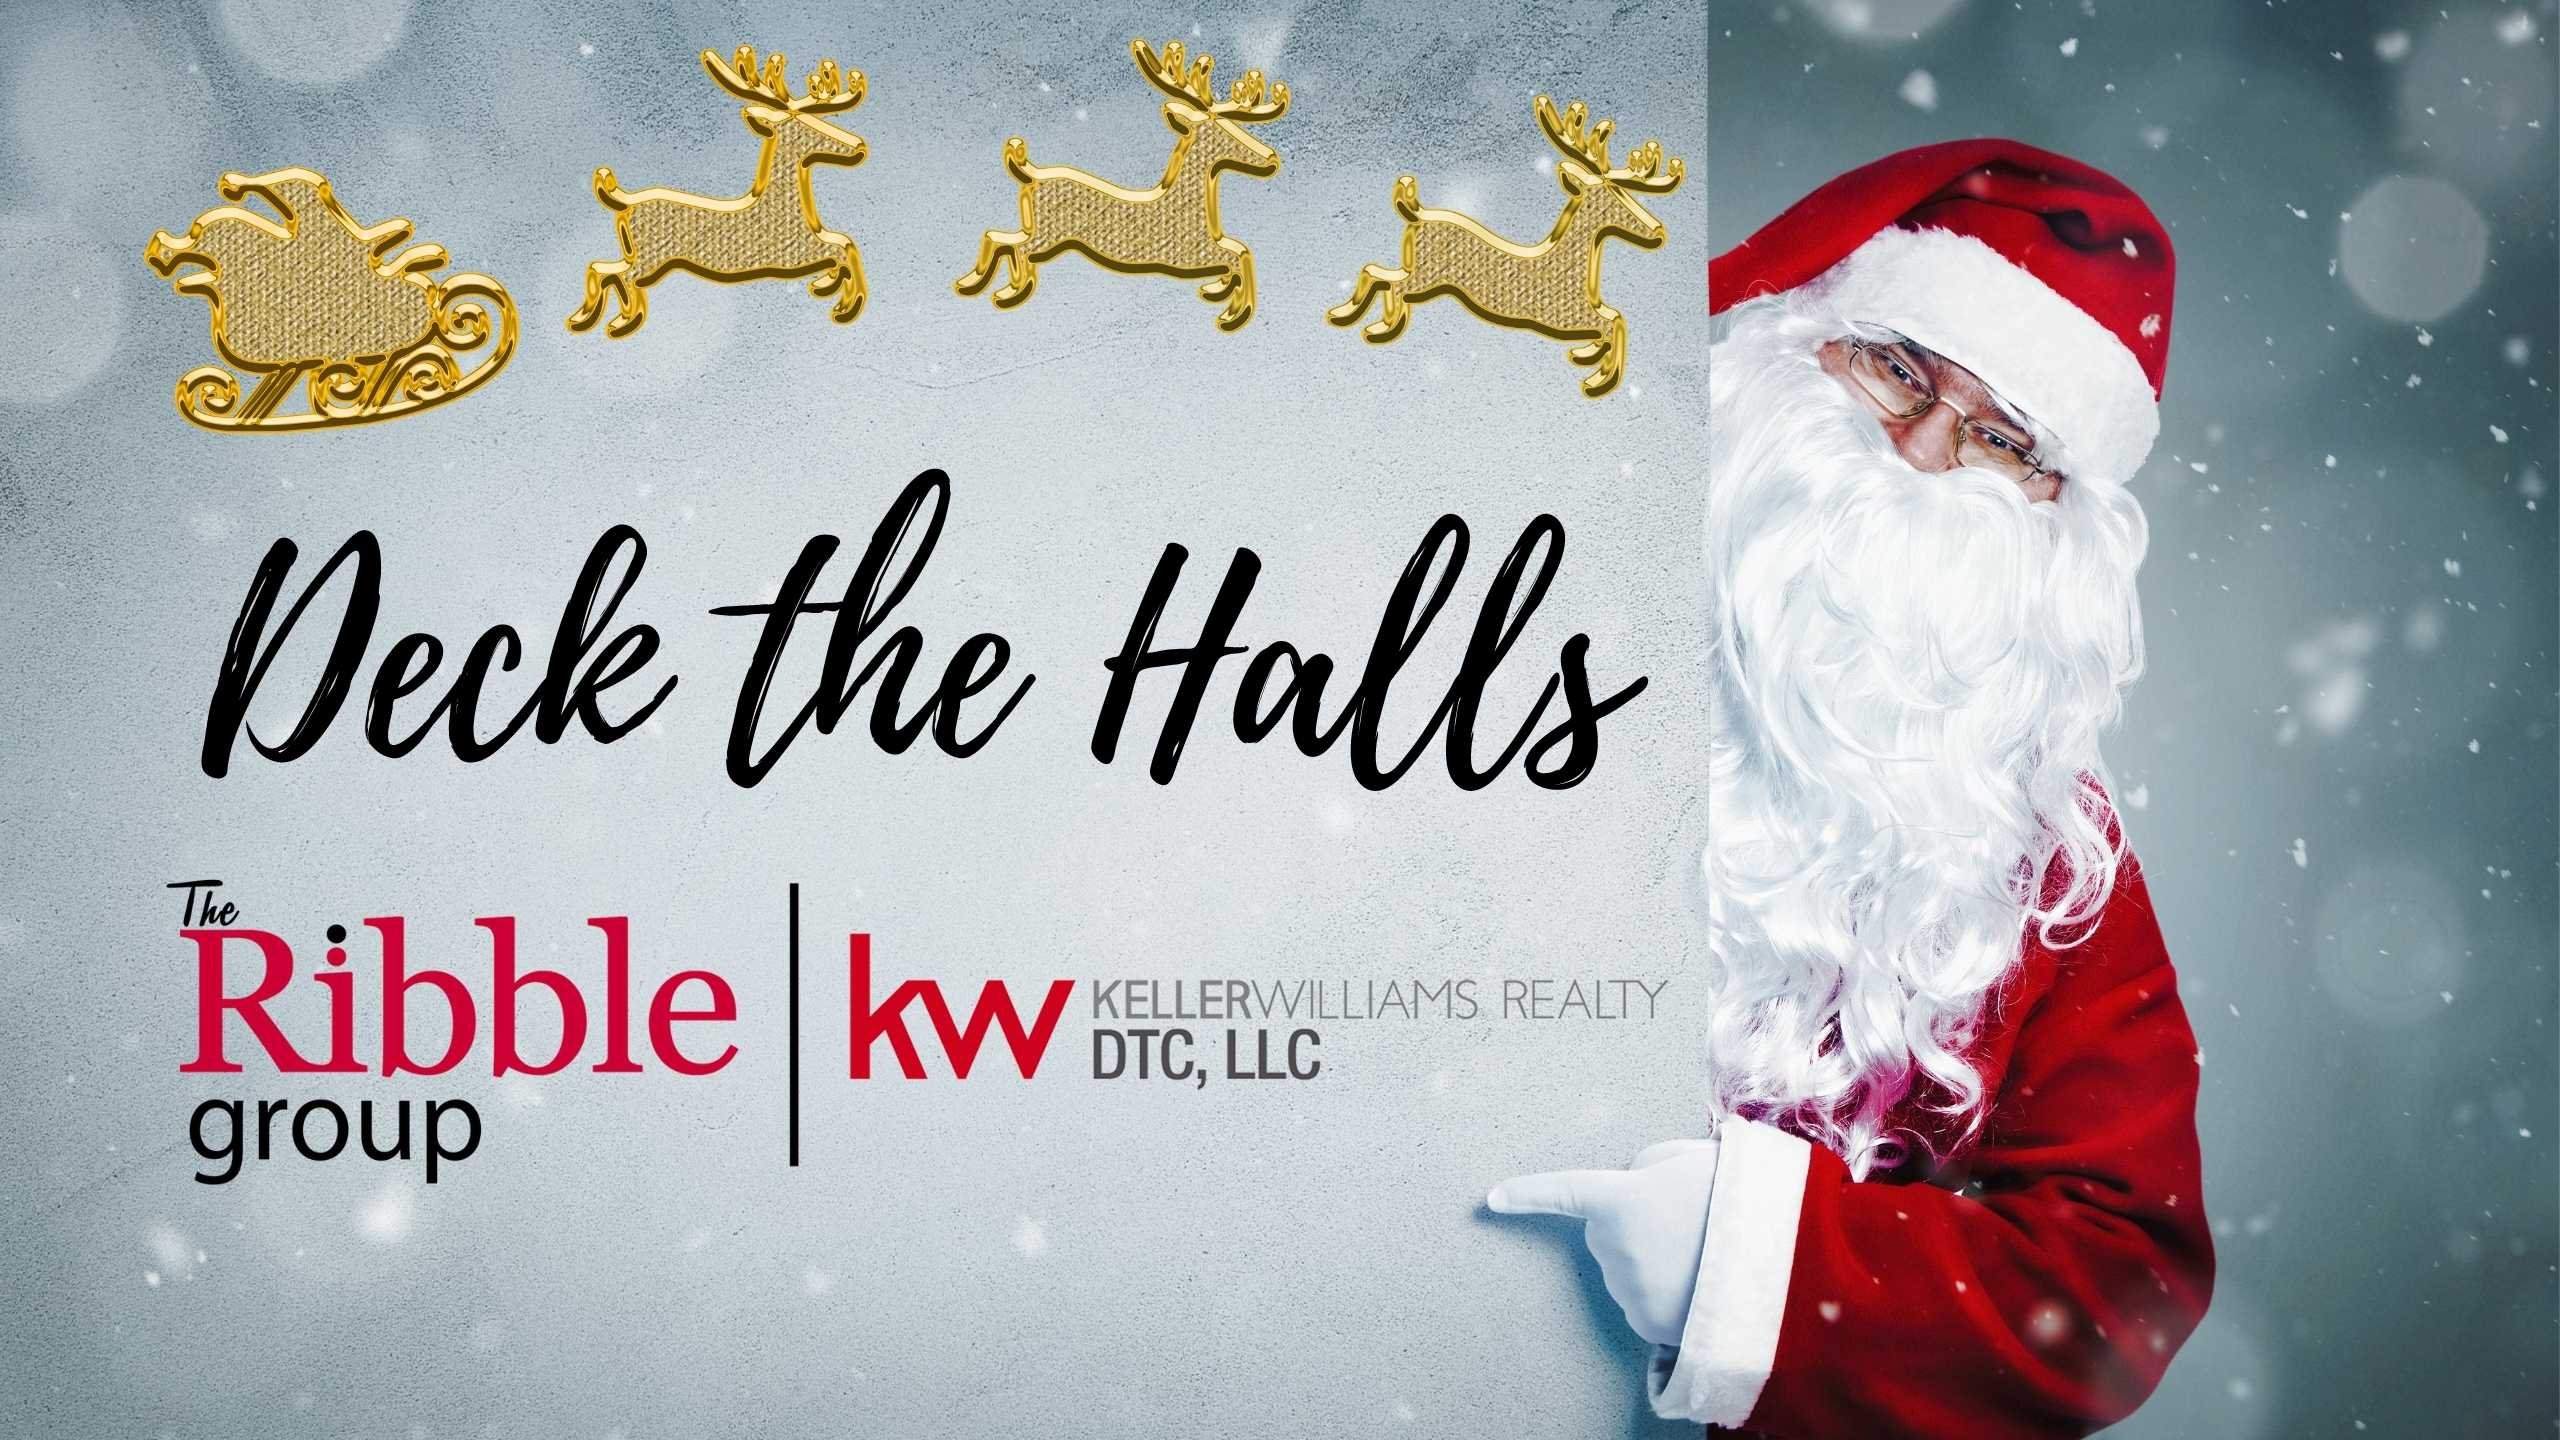 Deck The Halls with The Ribble Group